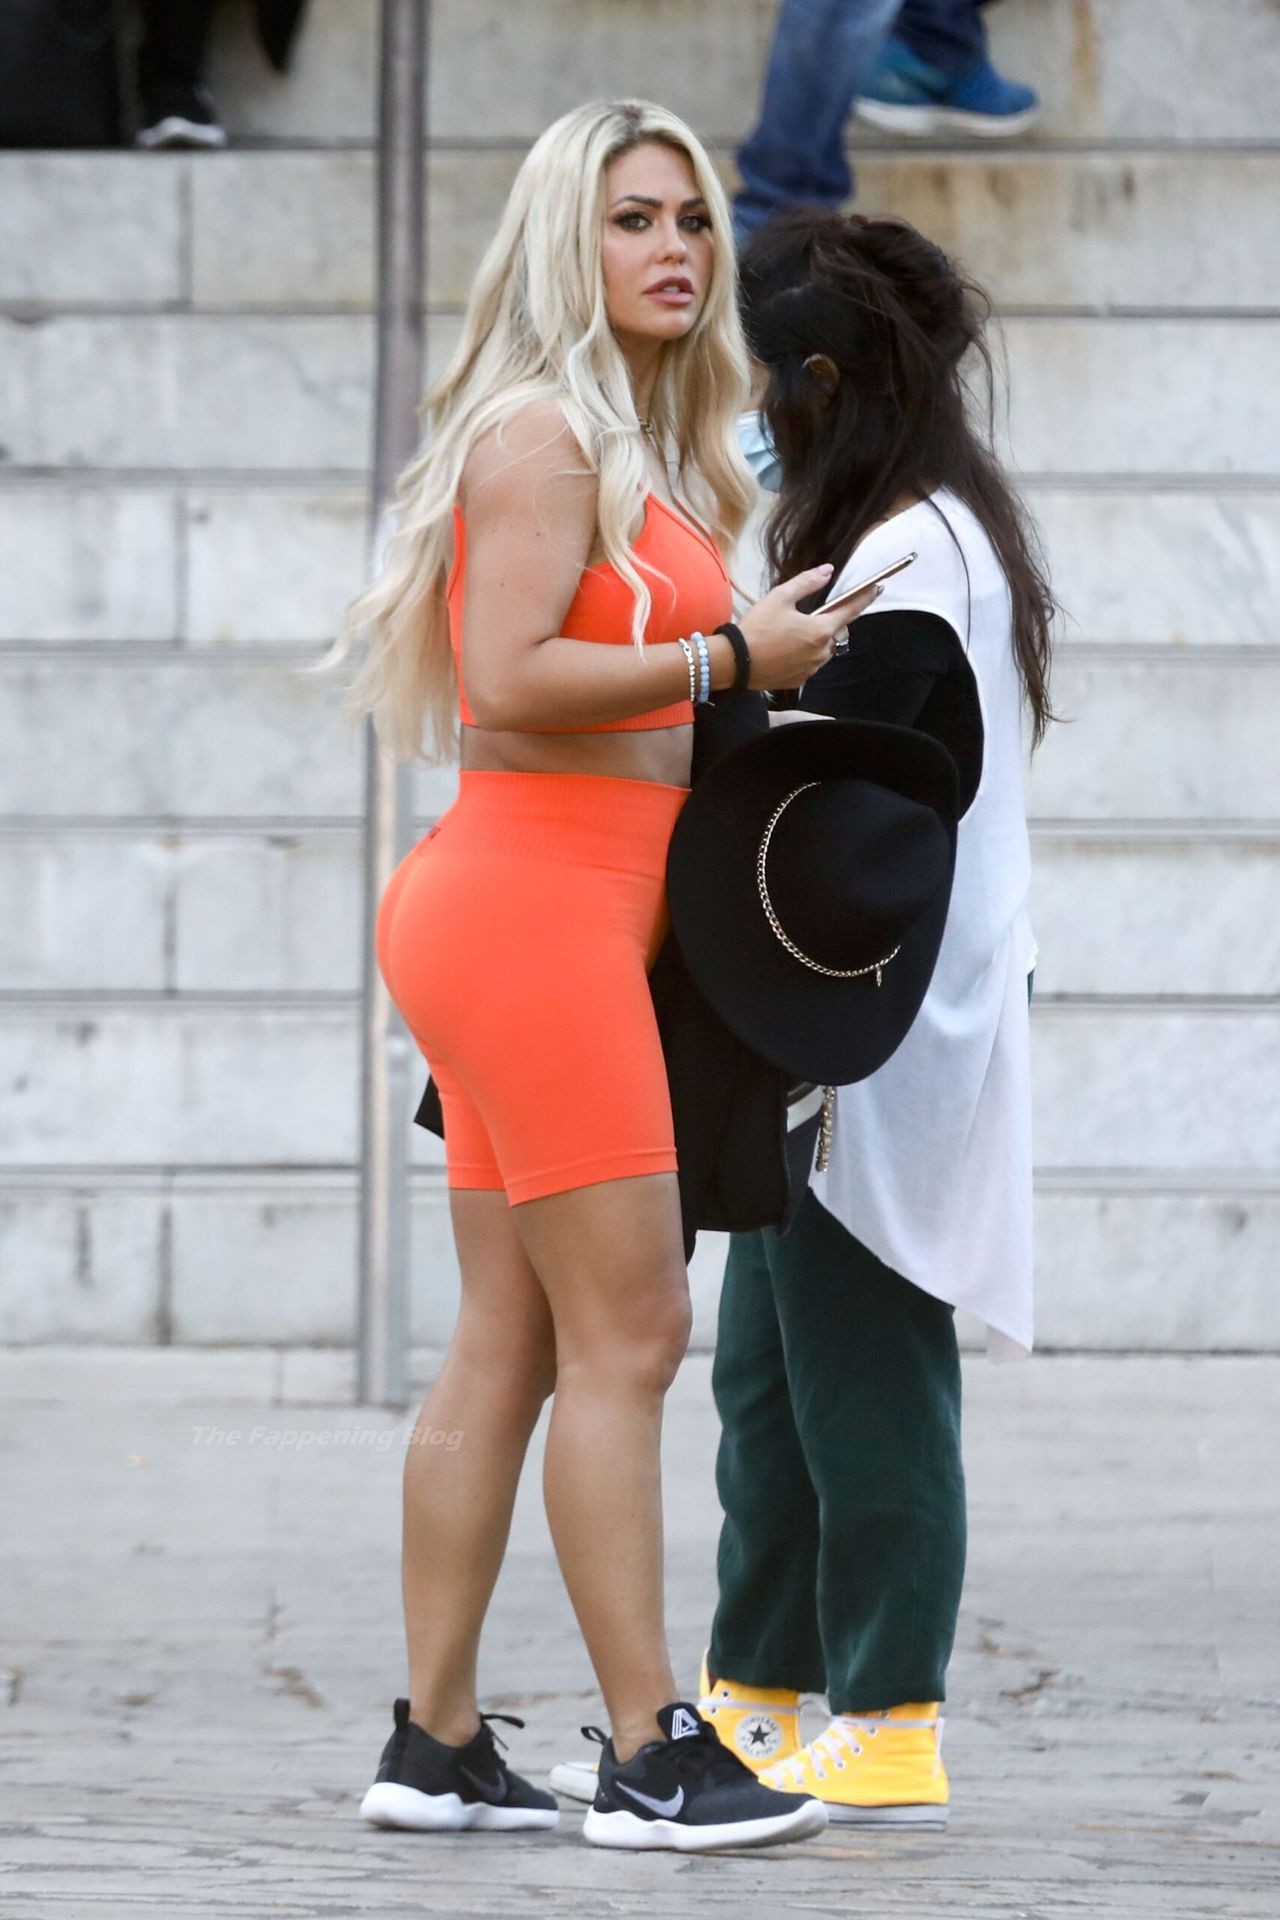 Bianca Gascoigne Showcases Her Ample Assets In A Busty Orange Bra And Shorts In Rome 15 Photos